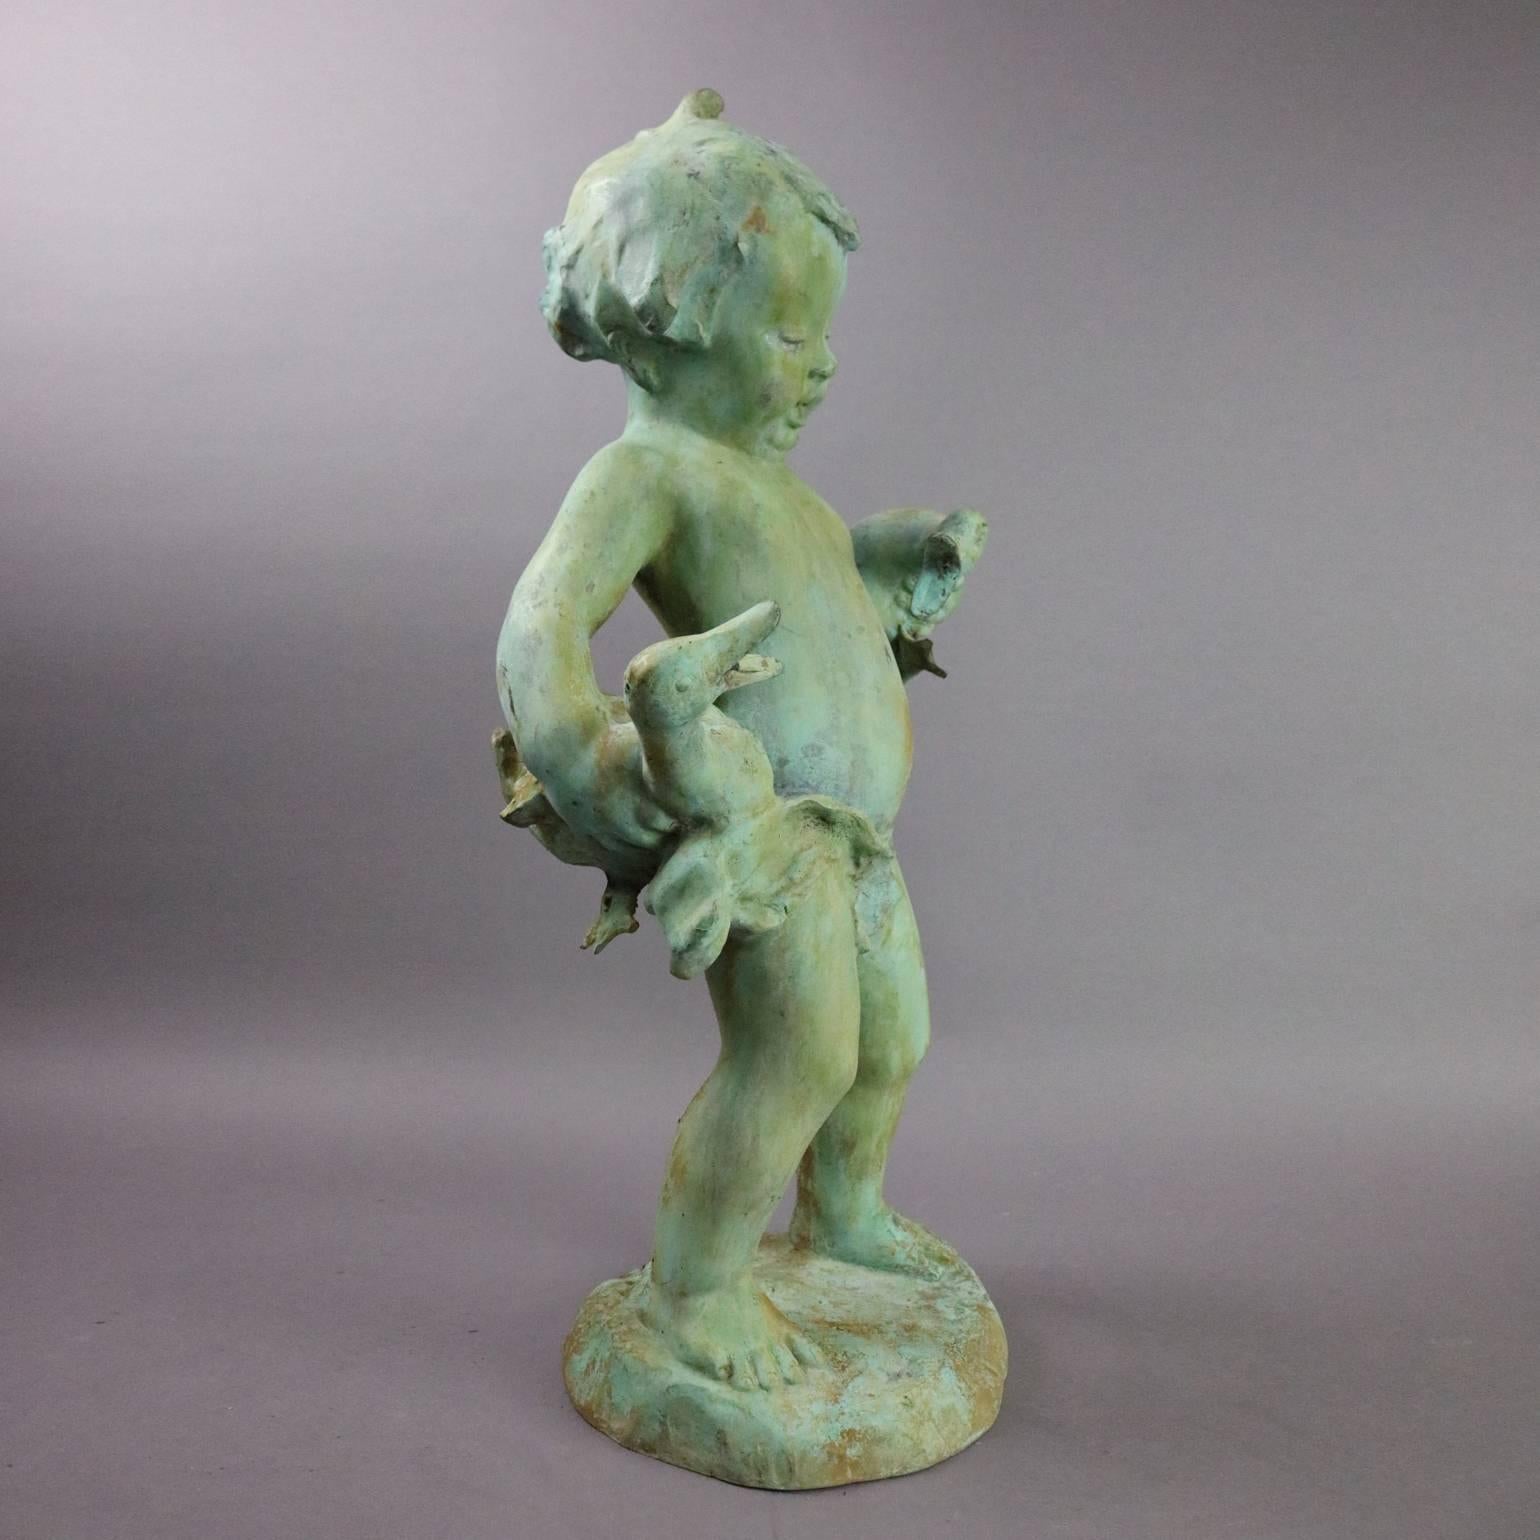 Antique French cast metal figural garden fountain head depicts young boy carrying his ducks, nice verdigris, circa 1880

Measures: 24" H x 12" W x 8" D; 8" x 9" base.